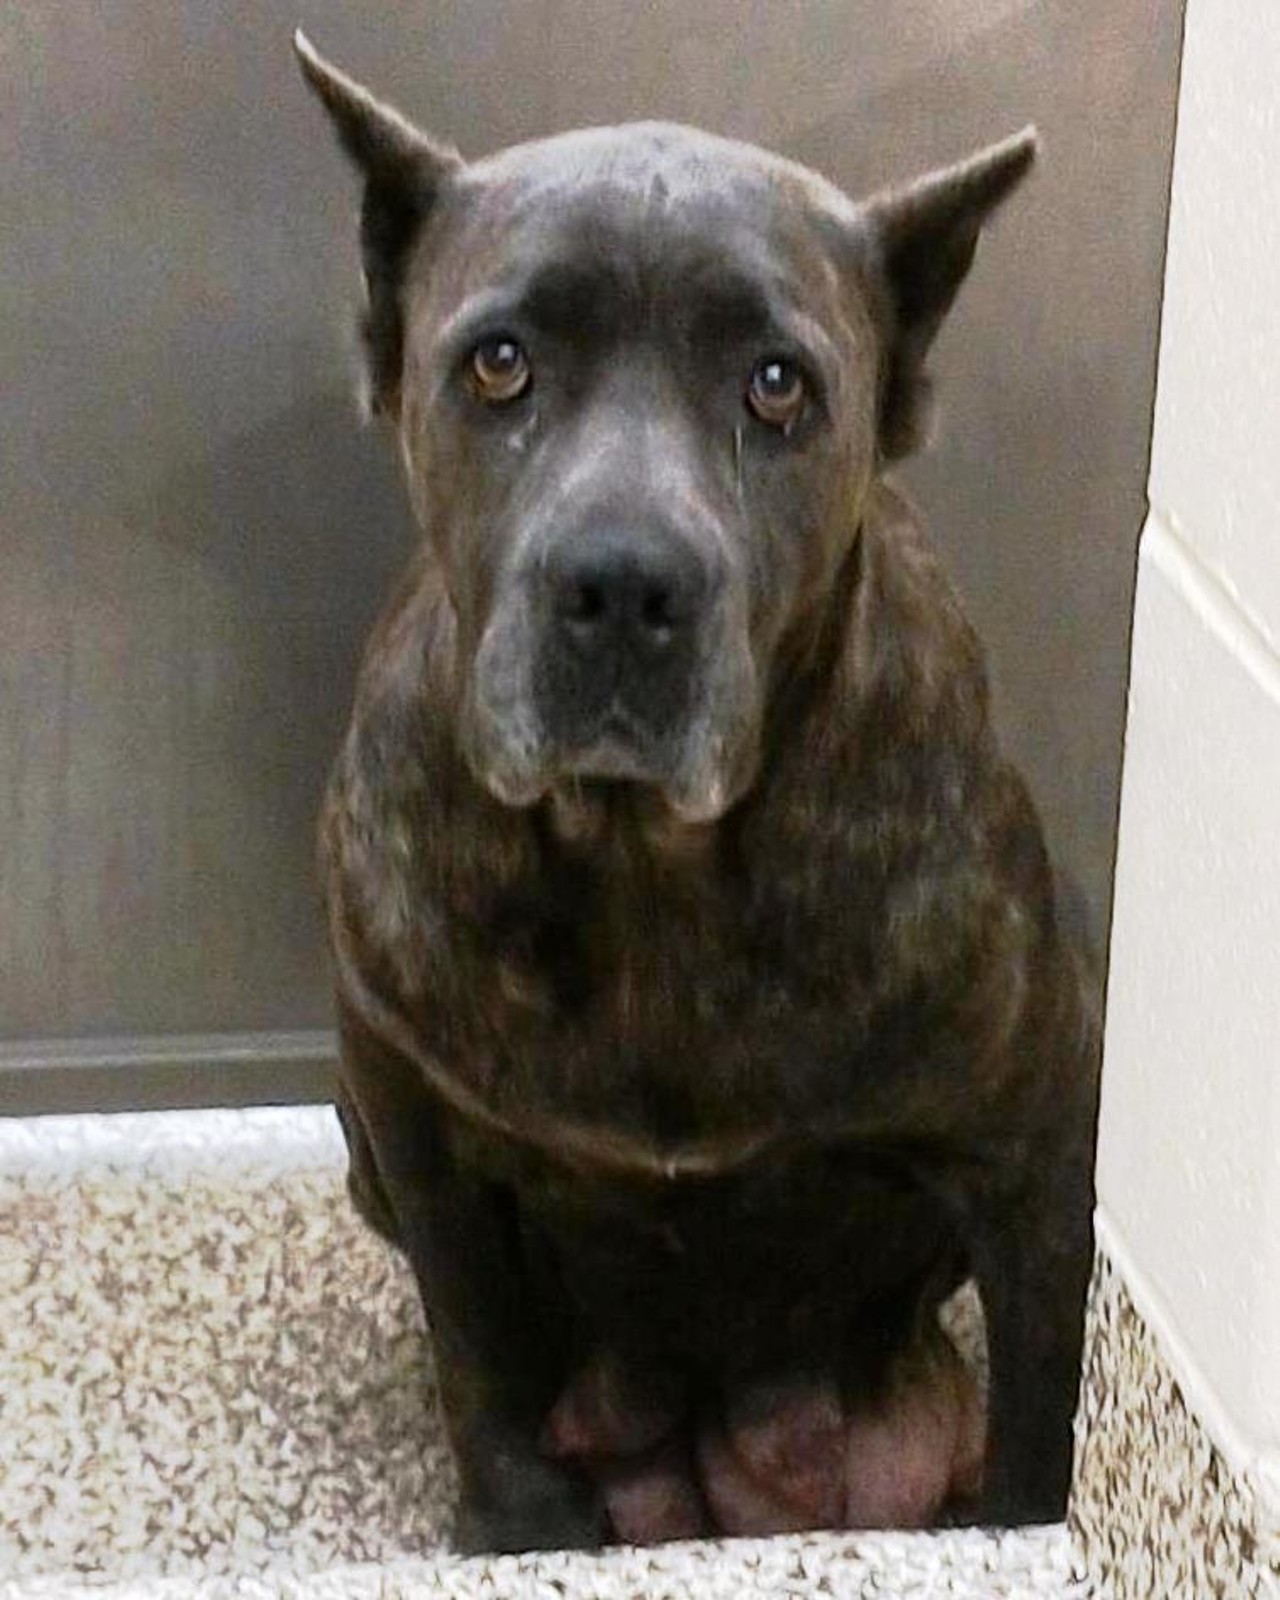 NAME: Shasta
GENDER: Female
BREED: Cane Corso
AGE: 5 years
WEIGHT: 85 pounds
SPECIAL CONSIDERATIONS: Shasta prefers a home with no cats and older or no children.
REASON I CAME TO MHS: Homeless in Detroit
LOCATION: Mackey Center for Animal Care in Detroit
ID NUMBER: 870870